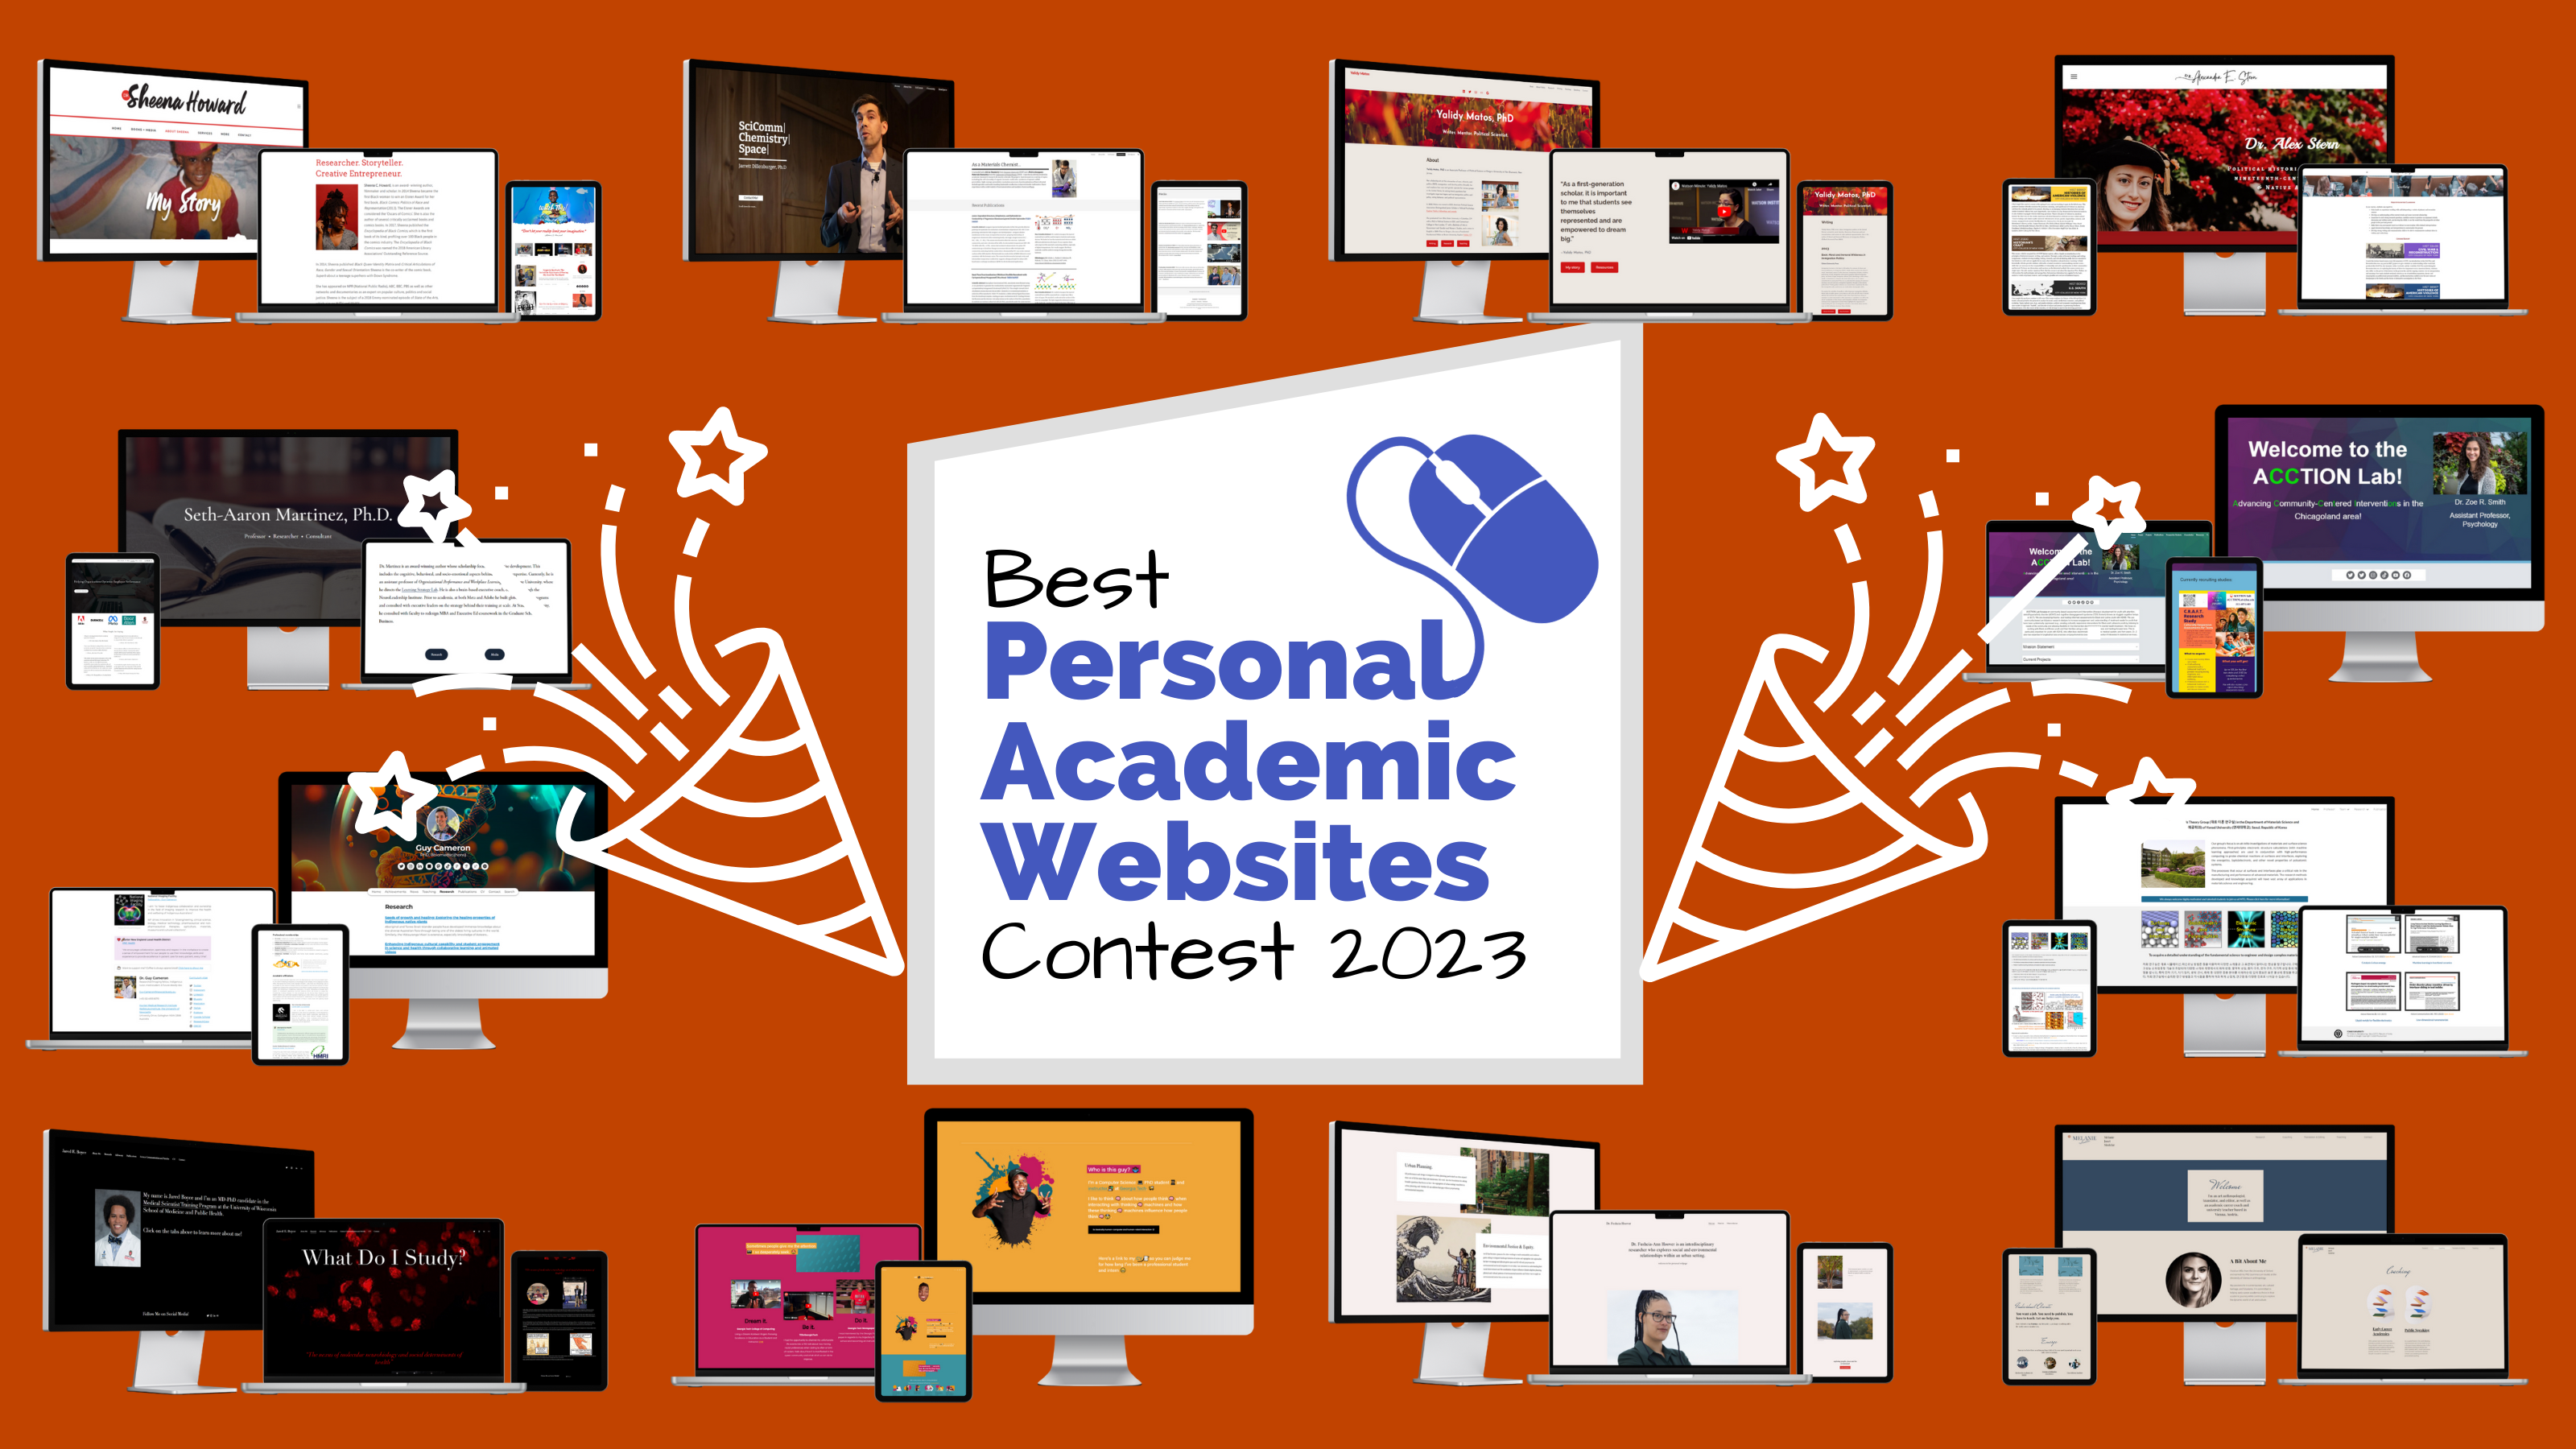 Winners of the Best Personal Academic Websites Contest 2023 with screenshots of the 12 award-winning websites